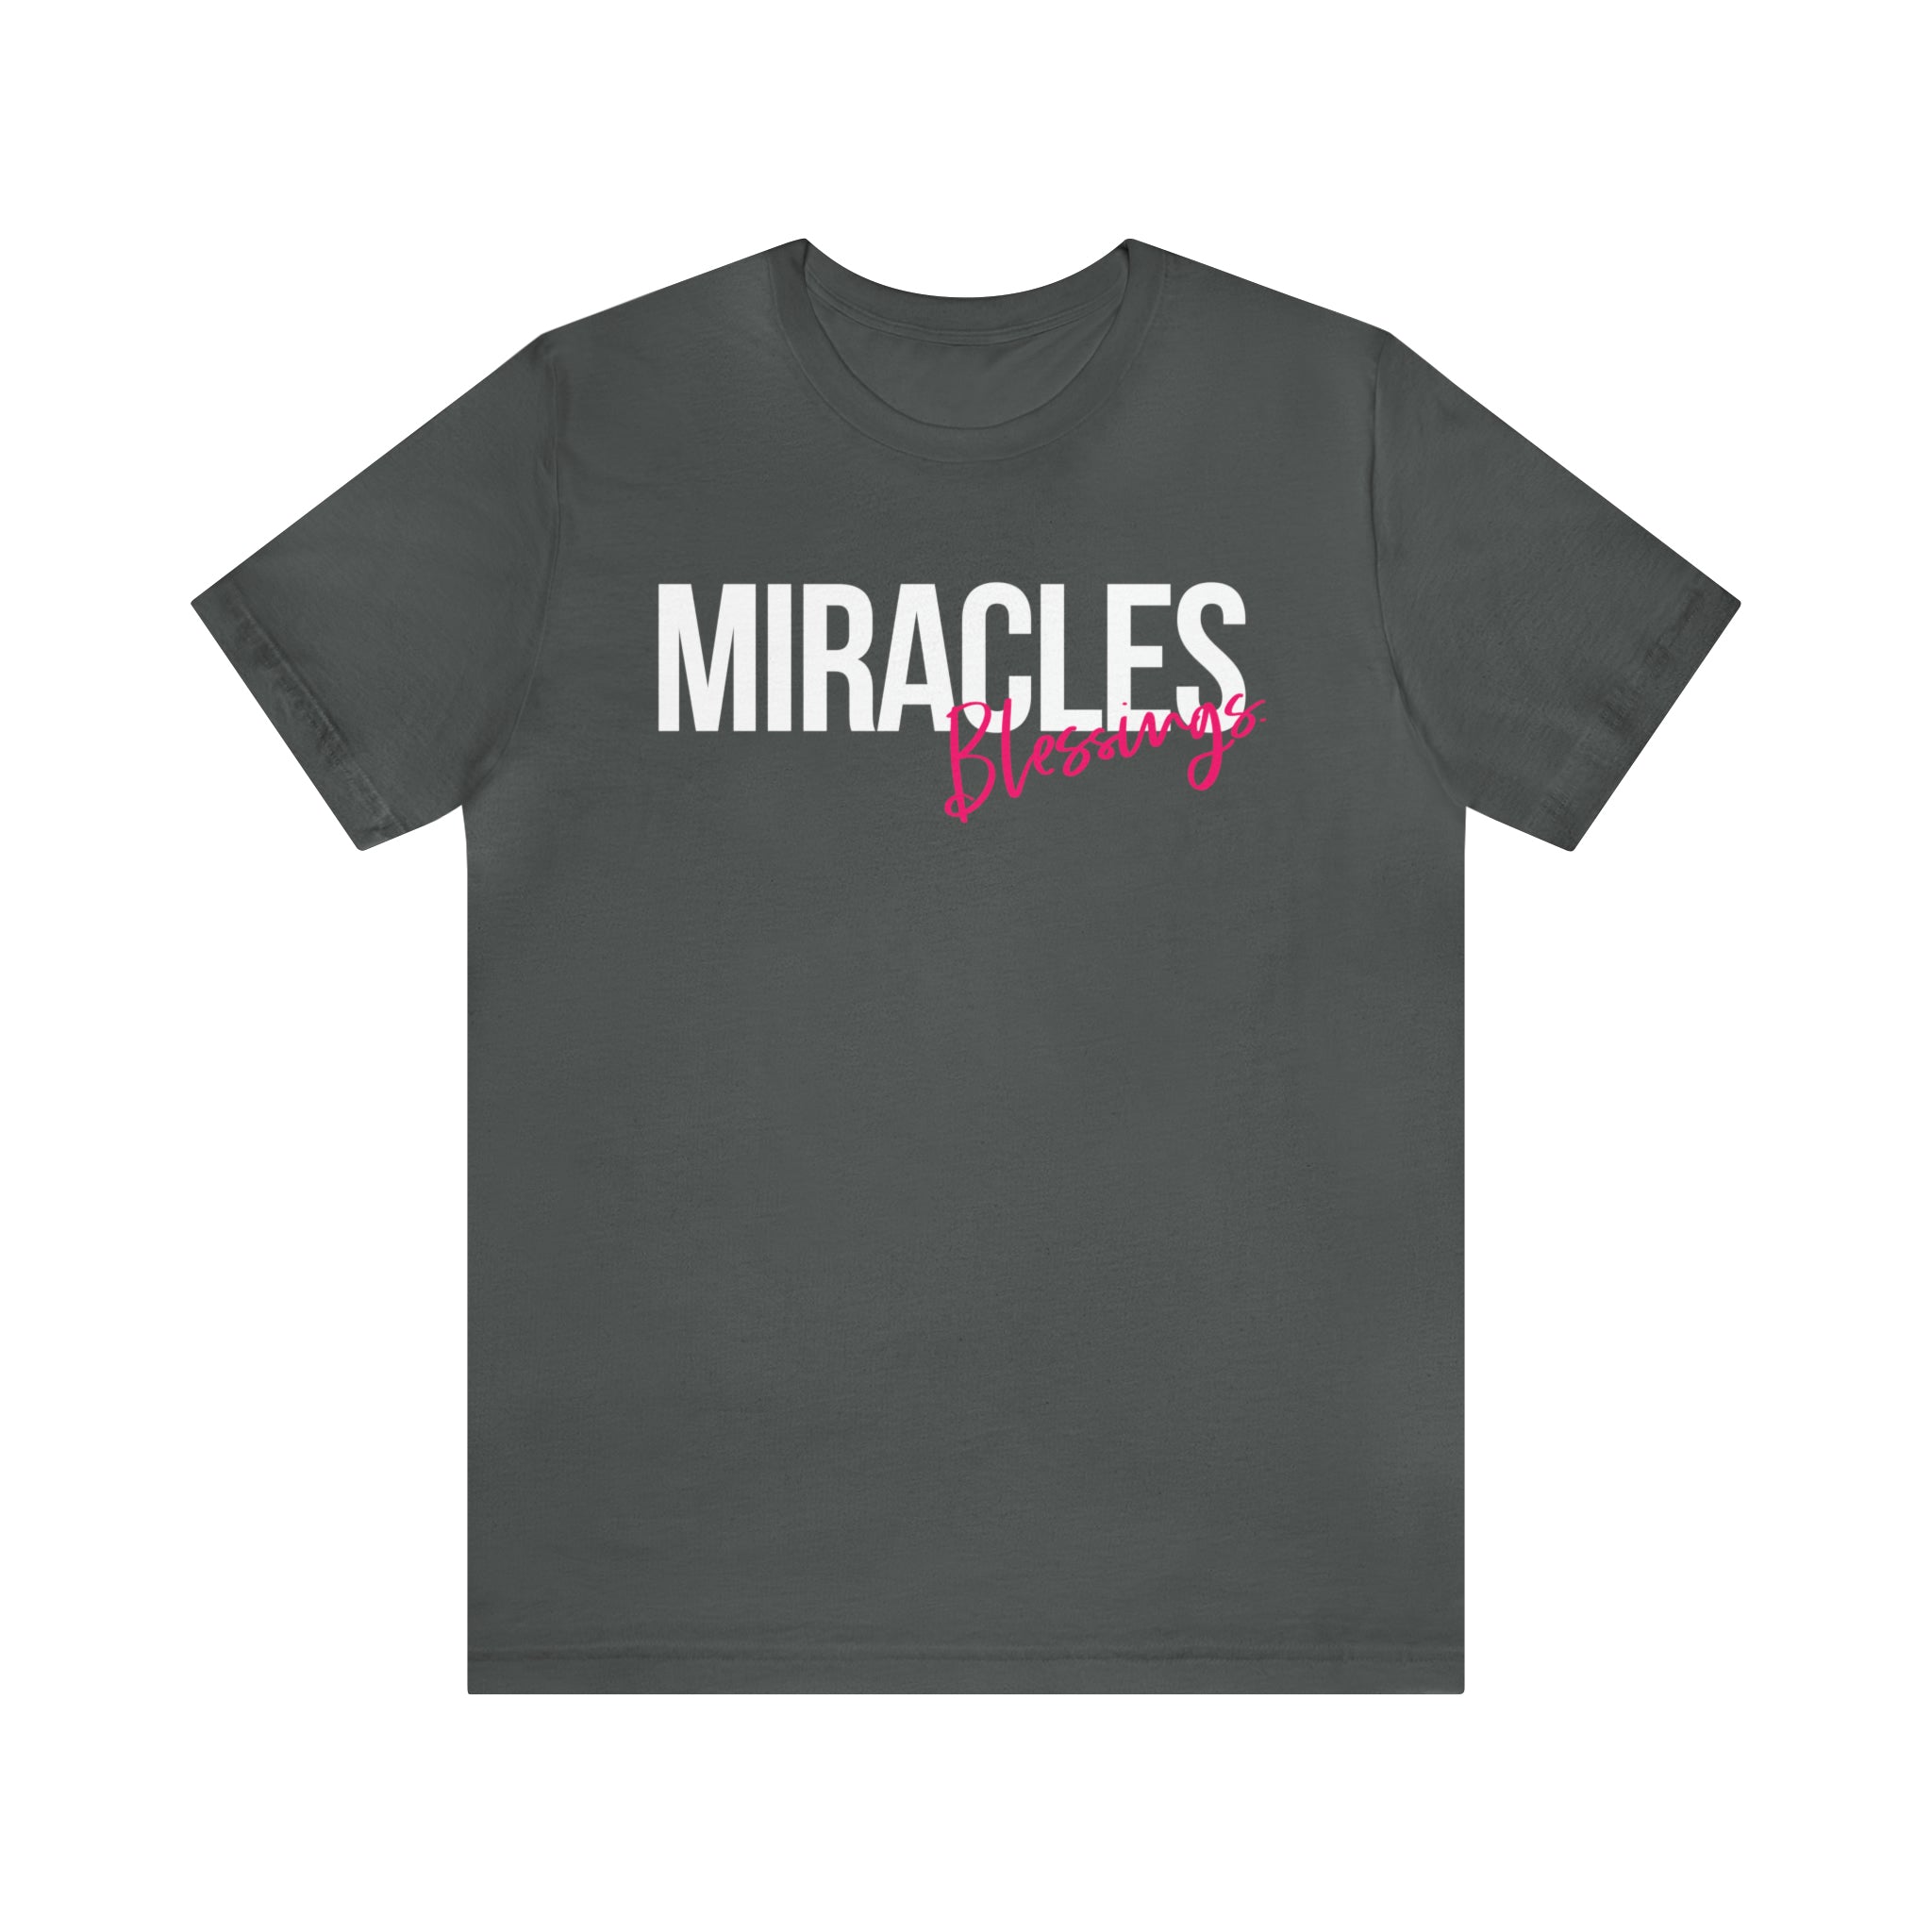 Miracles & Blessings